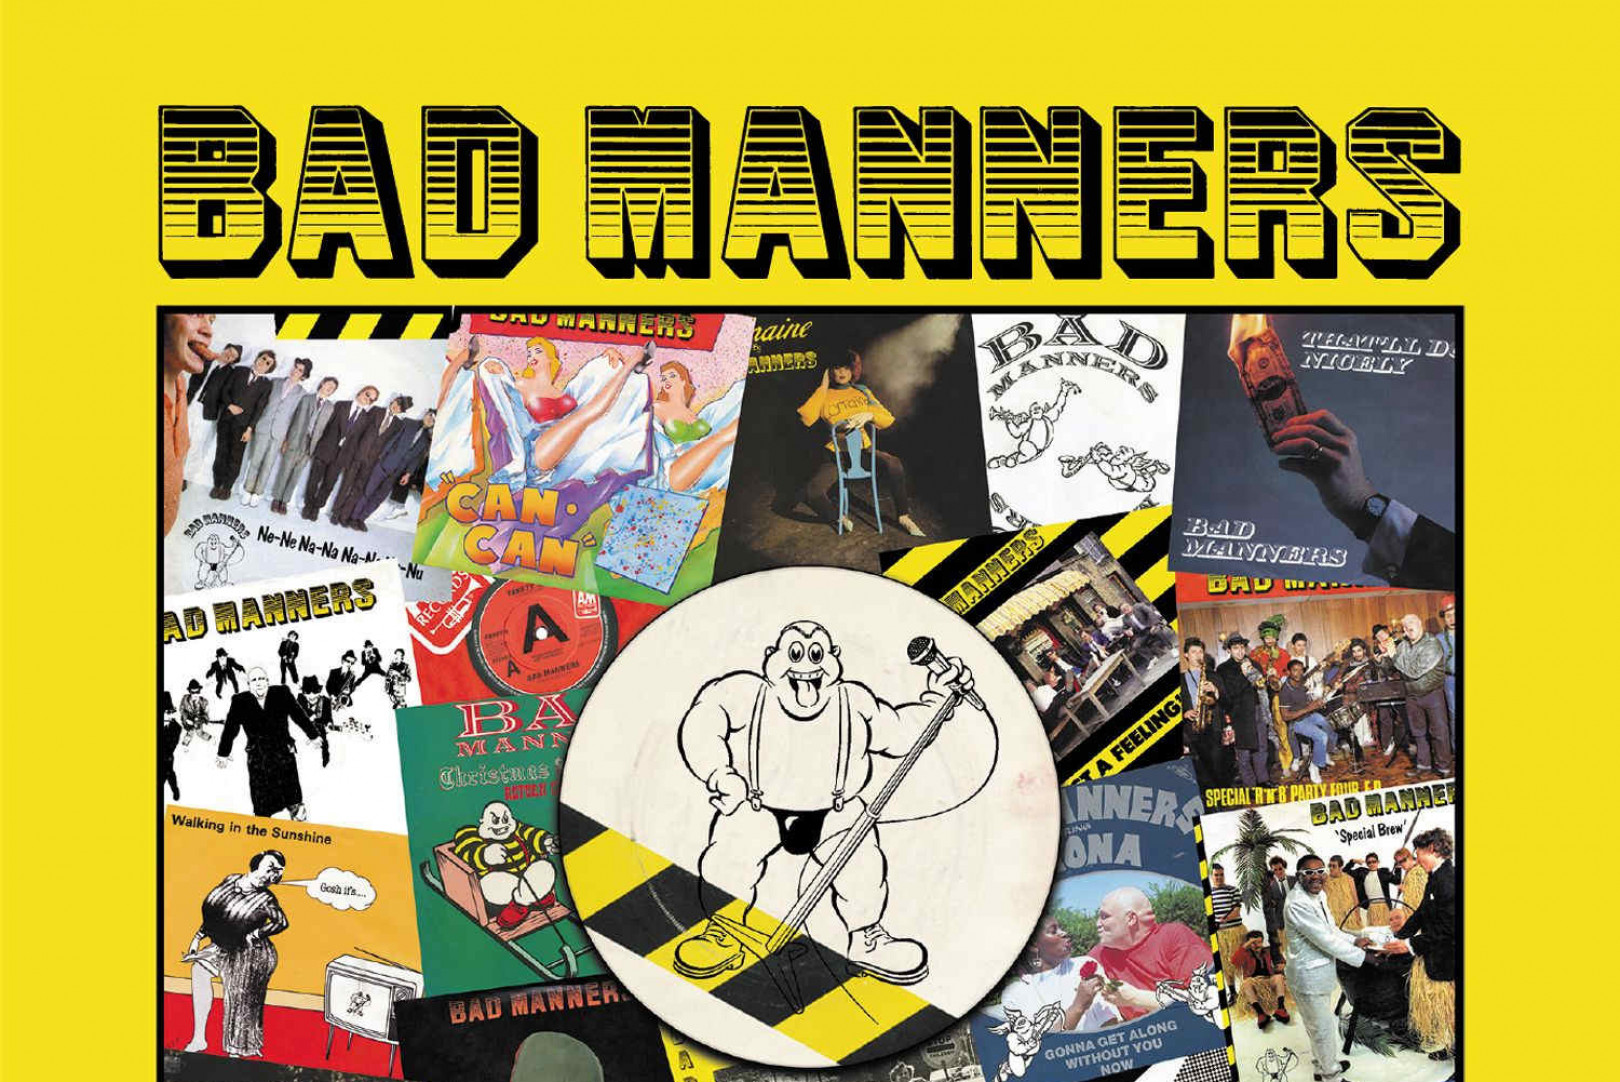 Bad Manners to release 3xCD singles collection